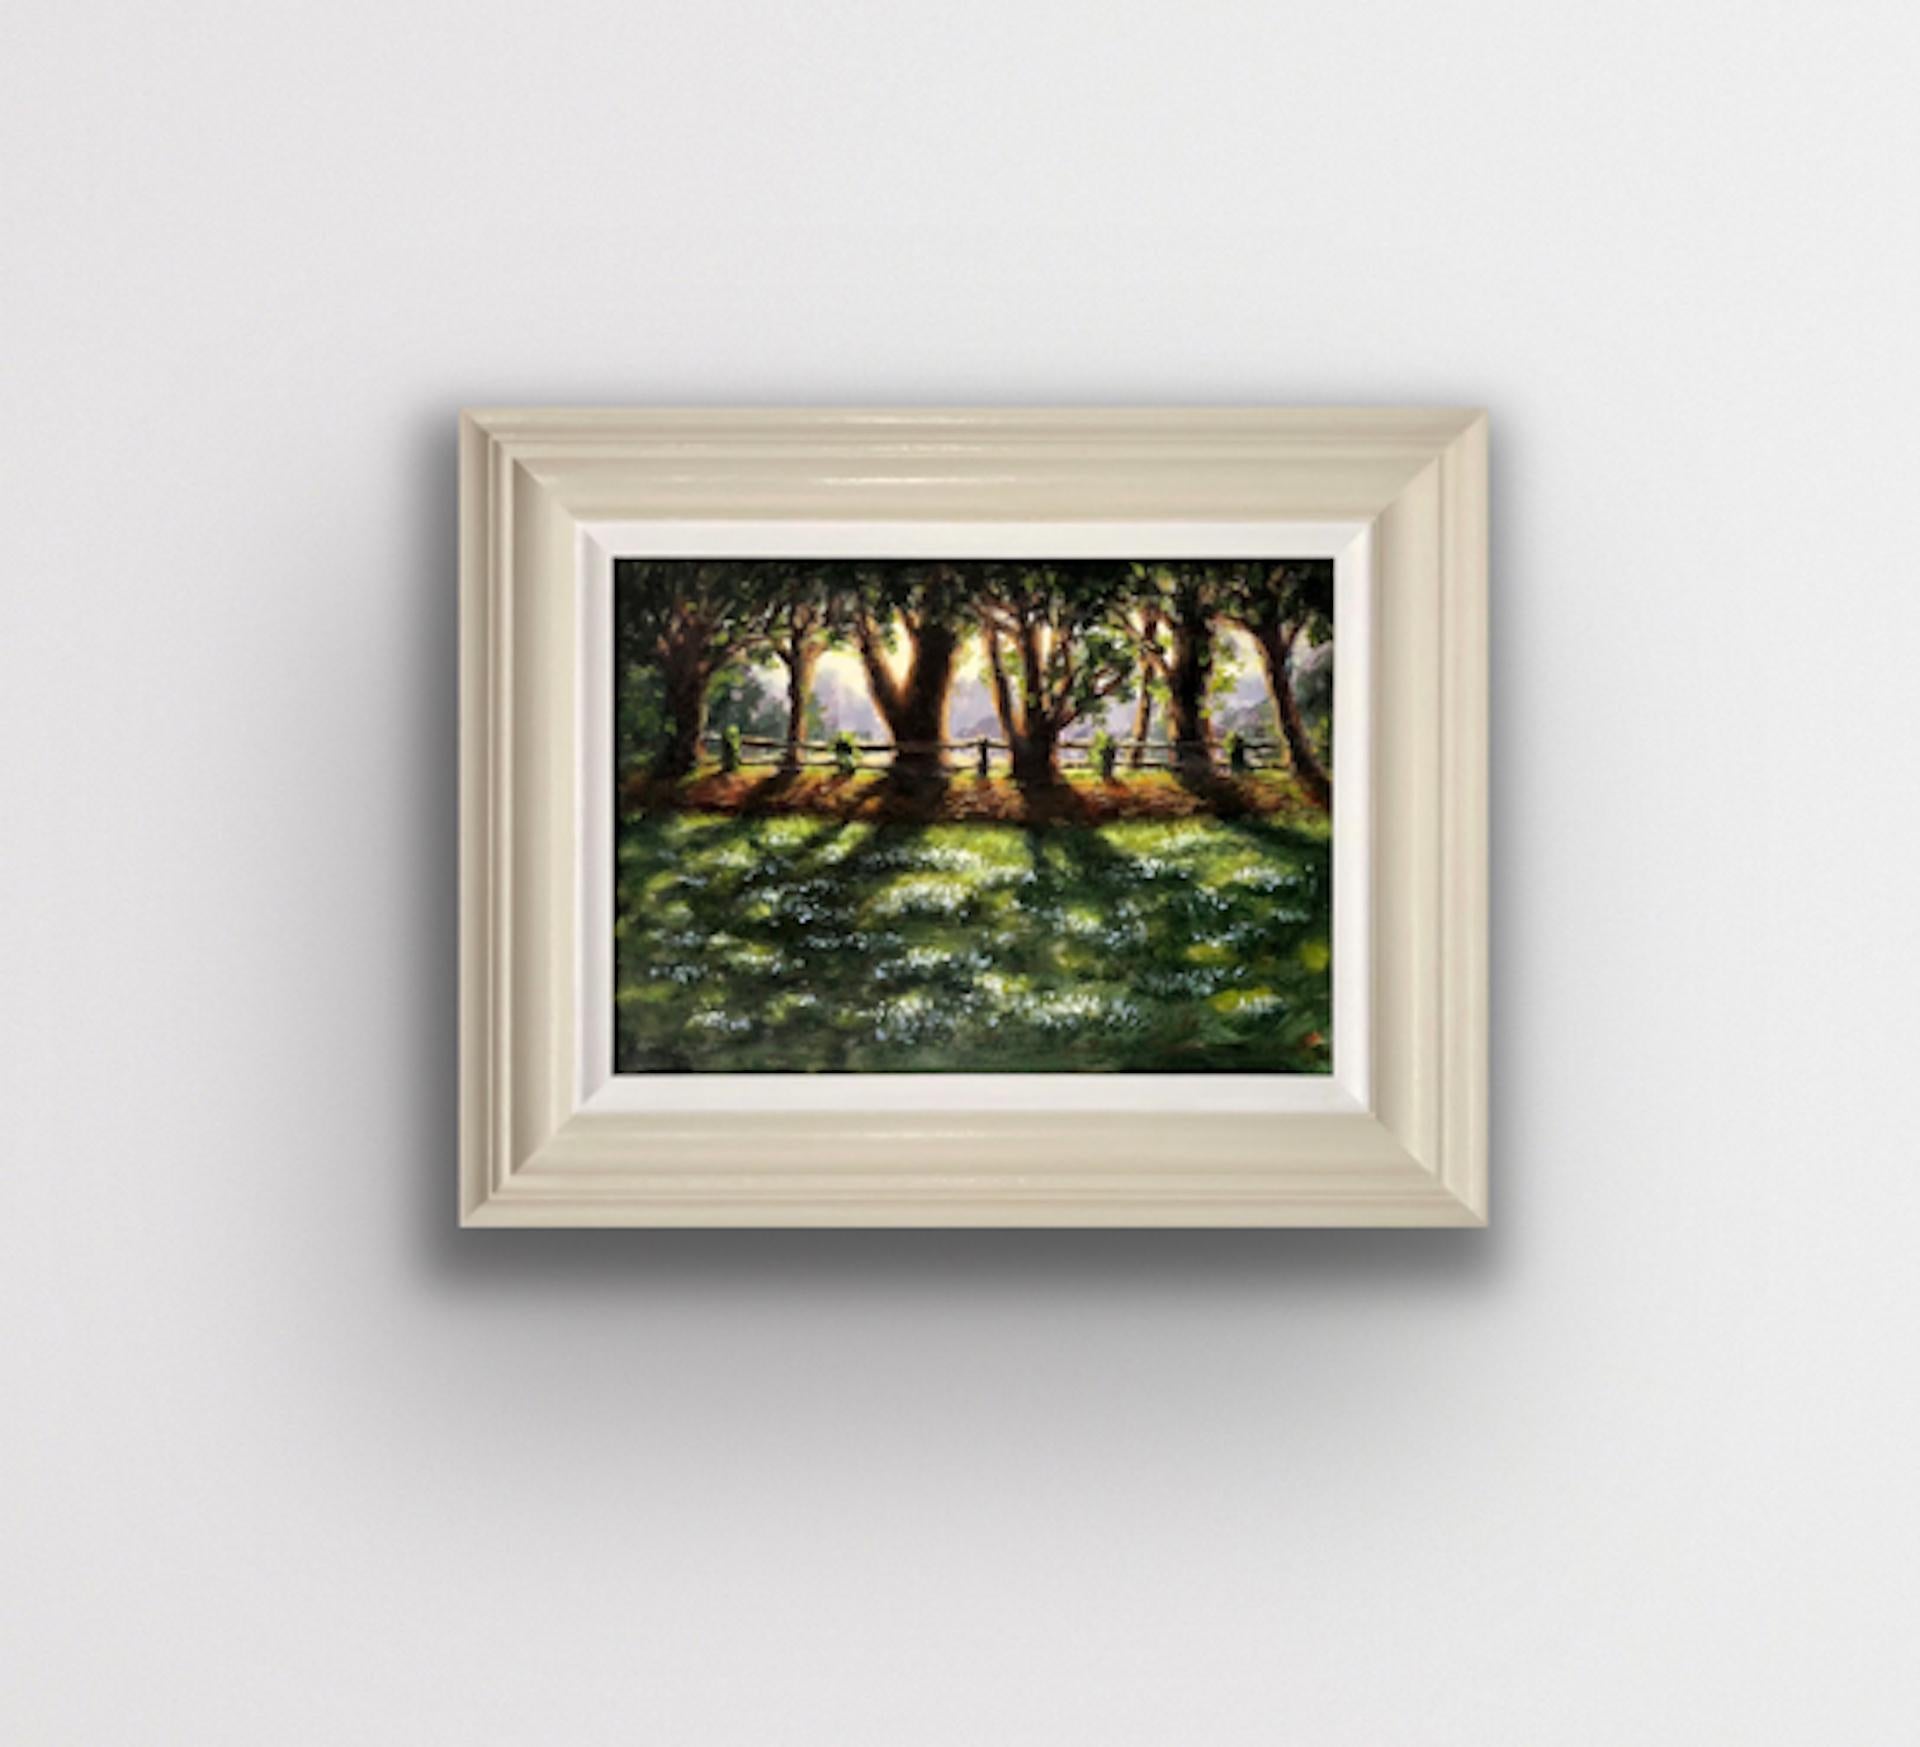 Sunlit Snowdrops, Swyncombe [2021]
Original
Landscape
Oil paint on board
Image Size: H:26 cm x W:36 cm 
Framed Size: H:39 cm x W:49 cm x D:3.5cm
Sold Framed
Please note that insitu images are purely an indication of how a piece may look

Marie